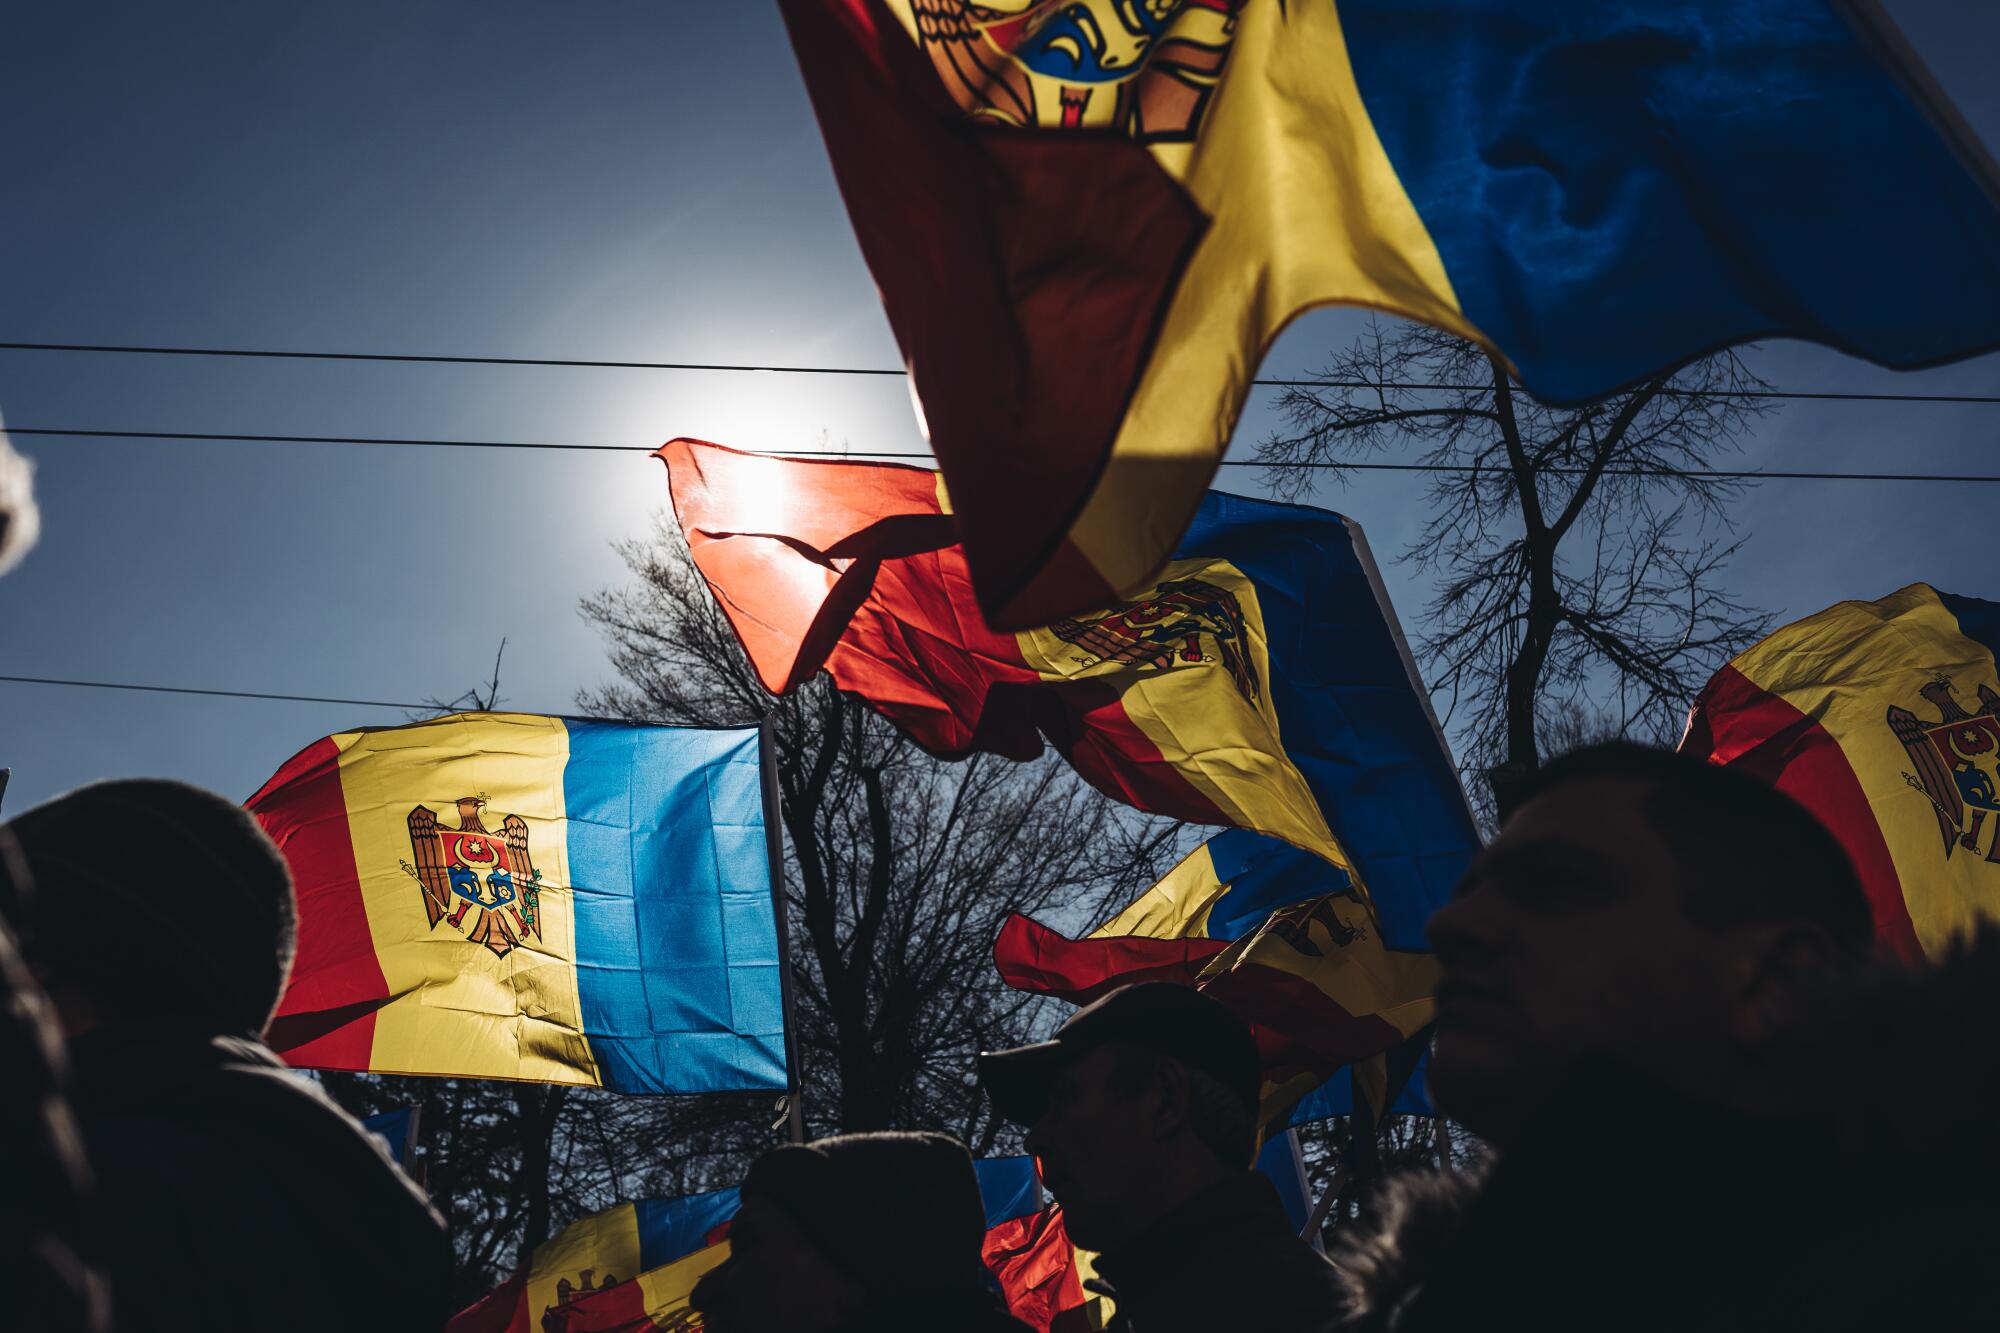  Thousands of people gather for anti-government protests in Moldova's capital Chisinau 